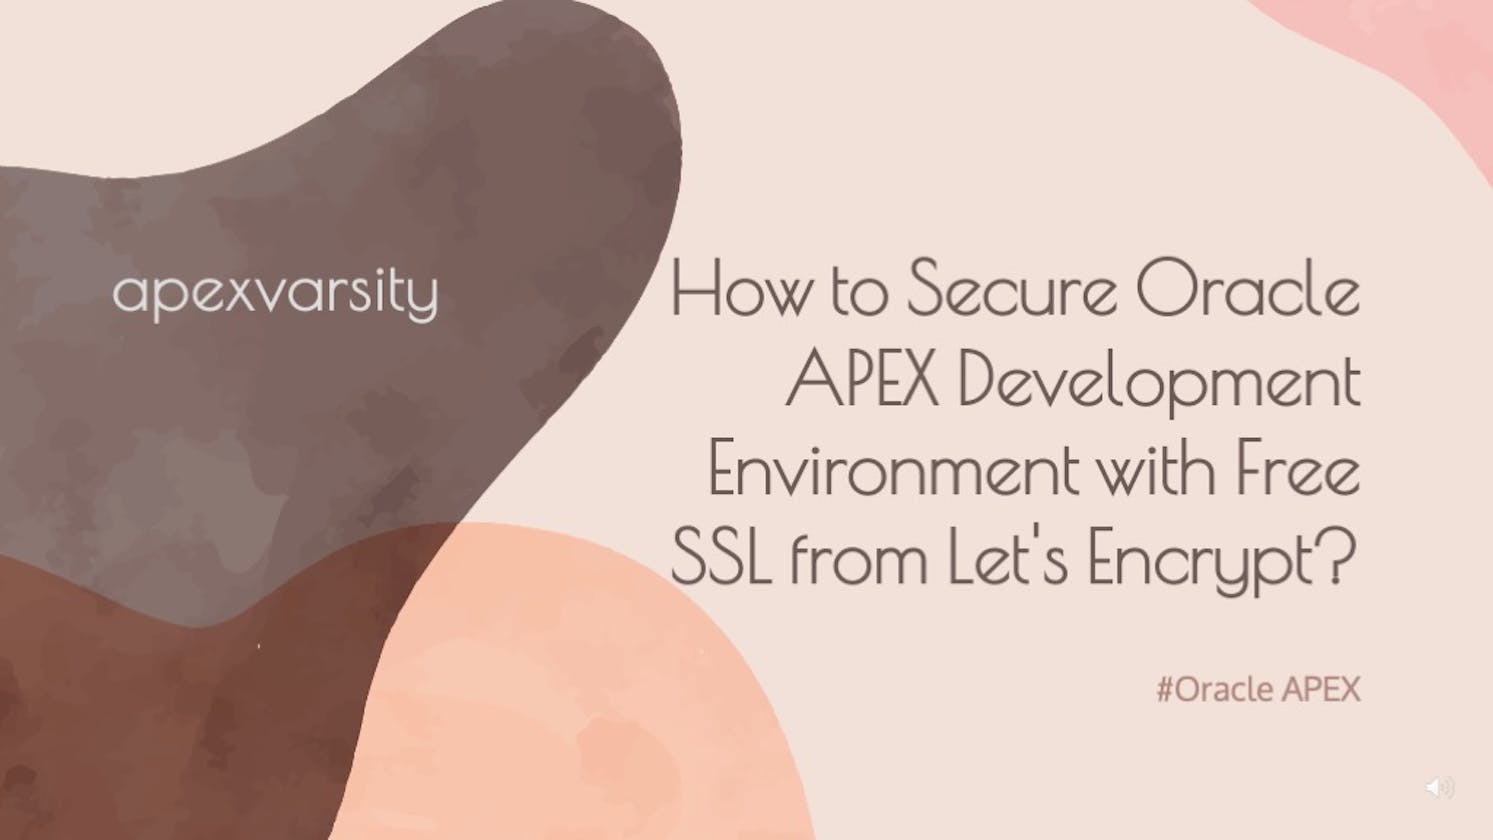 How to Secure Oracle APEX Development Environment with Free SSL from Let's Encrypt?